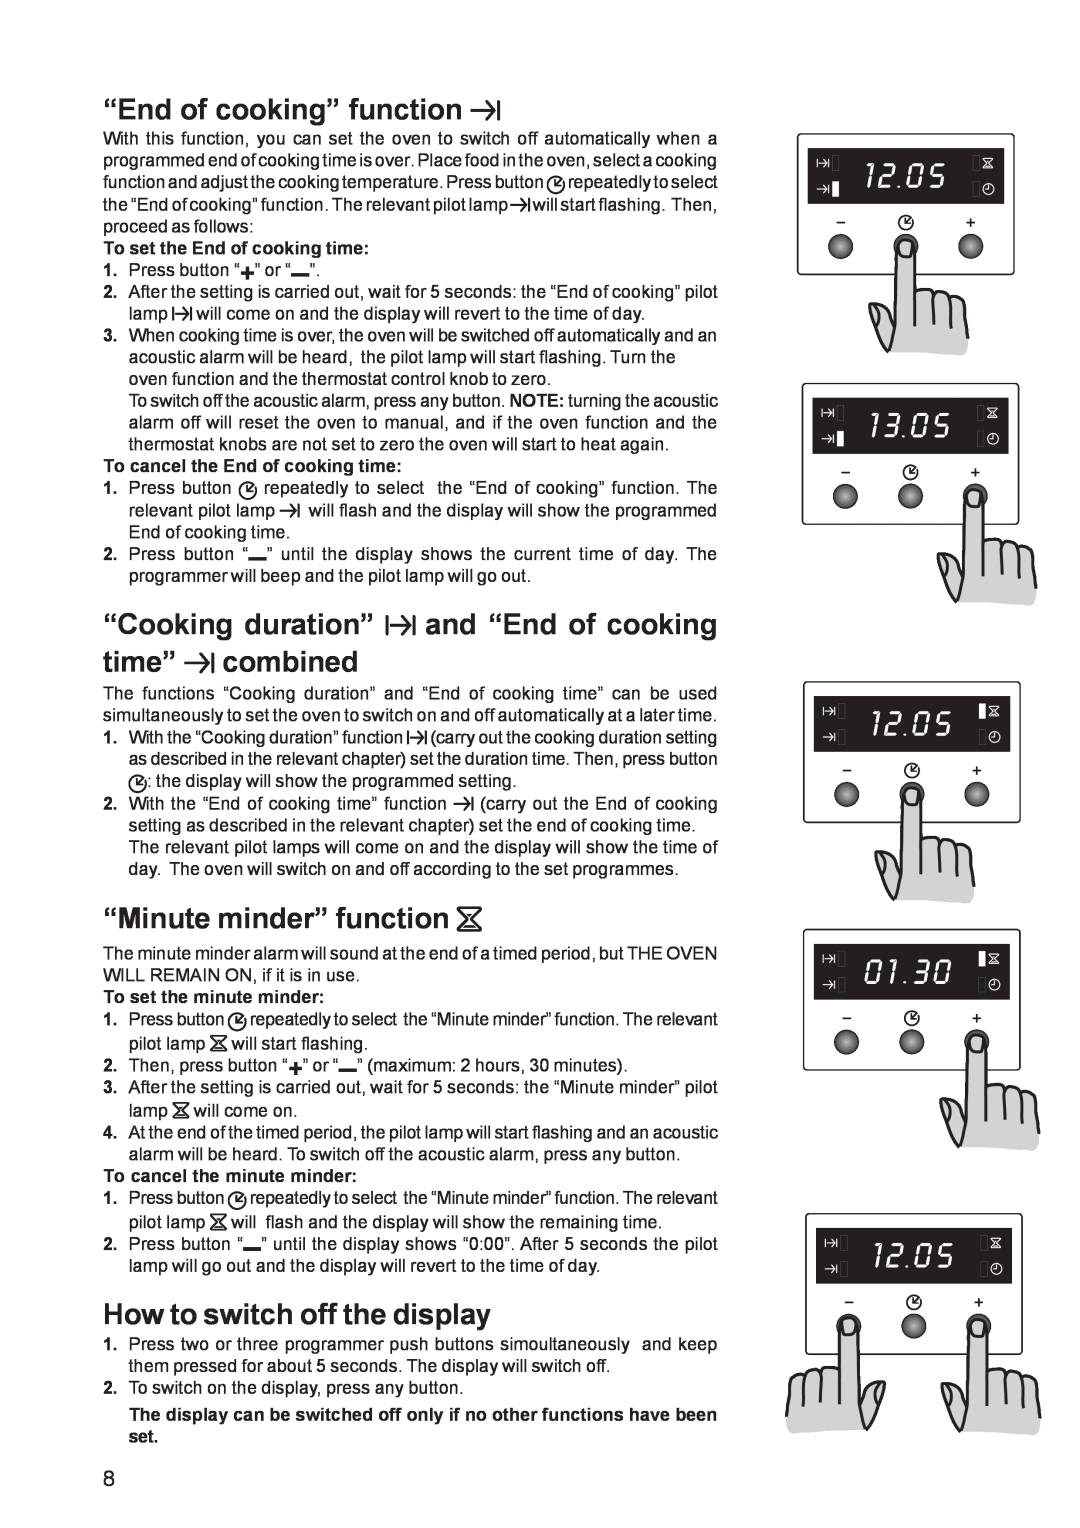 Zanussi ZBF 361 “End of cooking” function, “Cooking duration” and “End of cooking time” combined, “Minute minder” function 